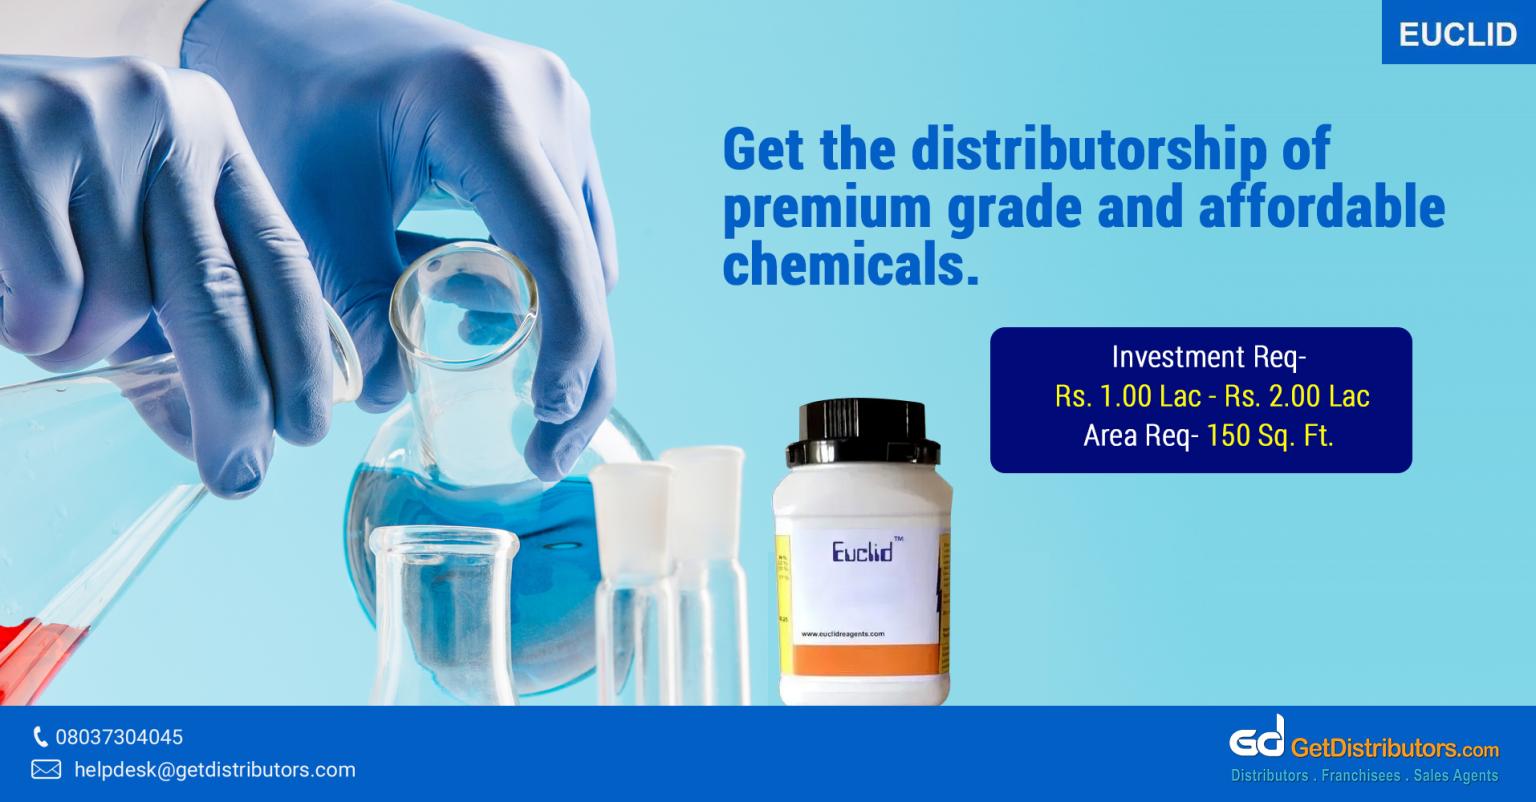 A wide range of high-quality chemicals for distribution